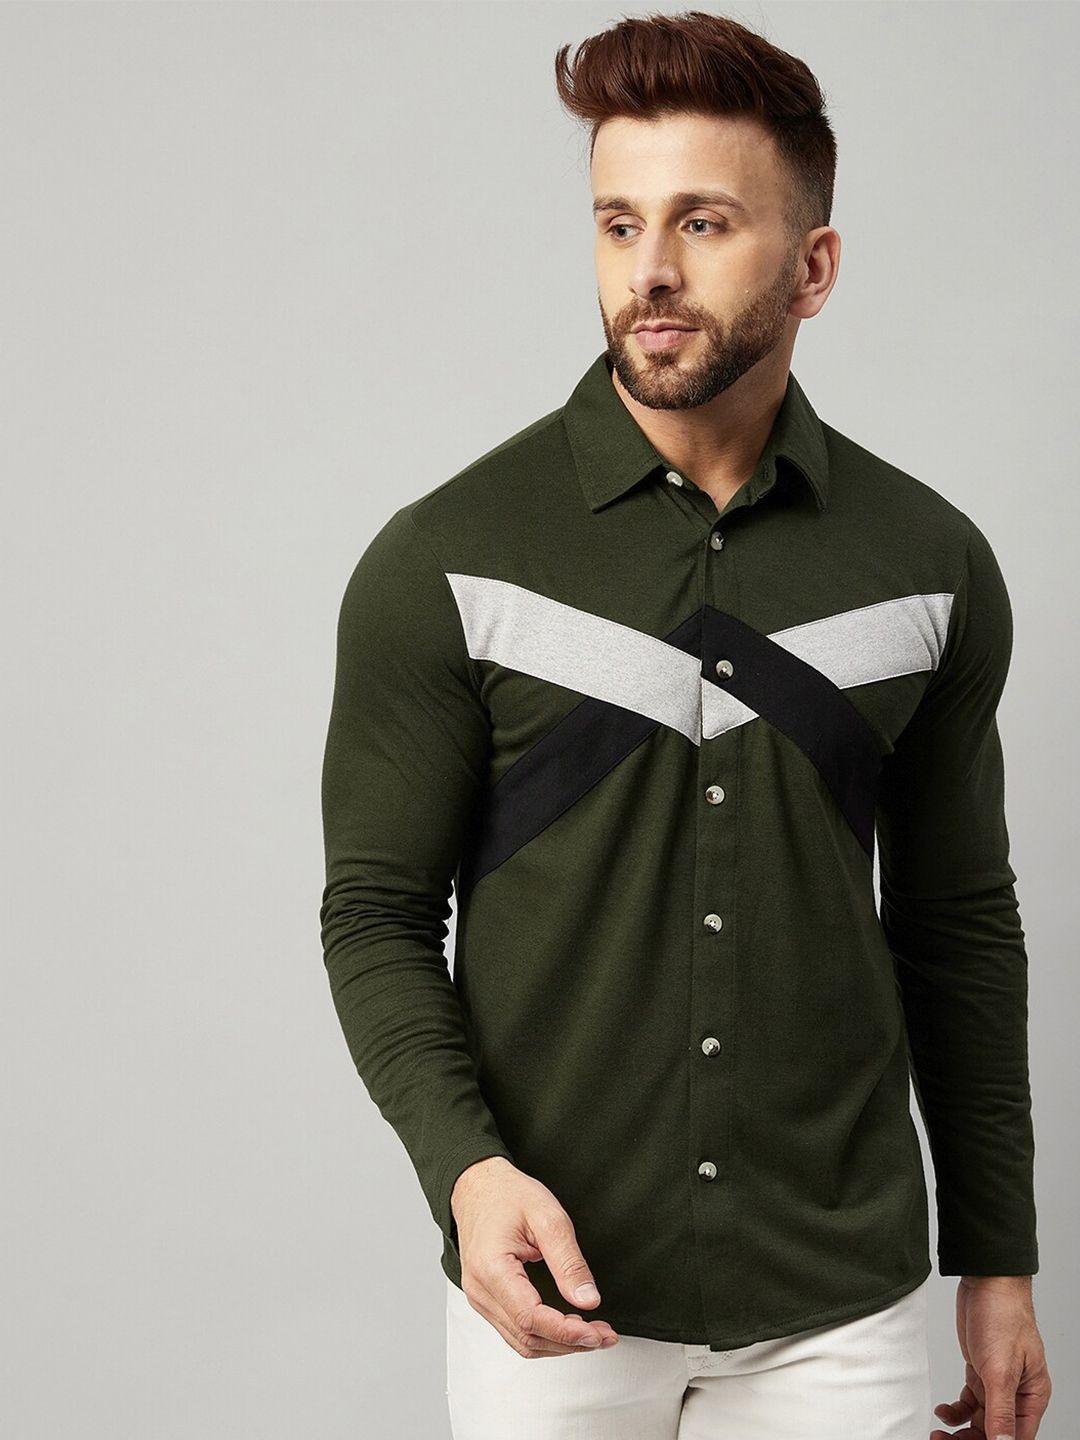 gritstones men olive green  solid colourblocked pattern opaque casual shirt